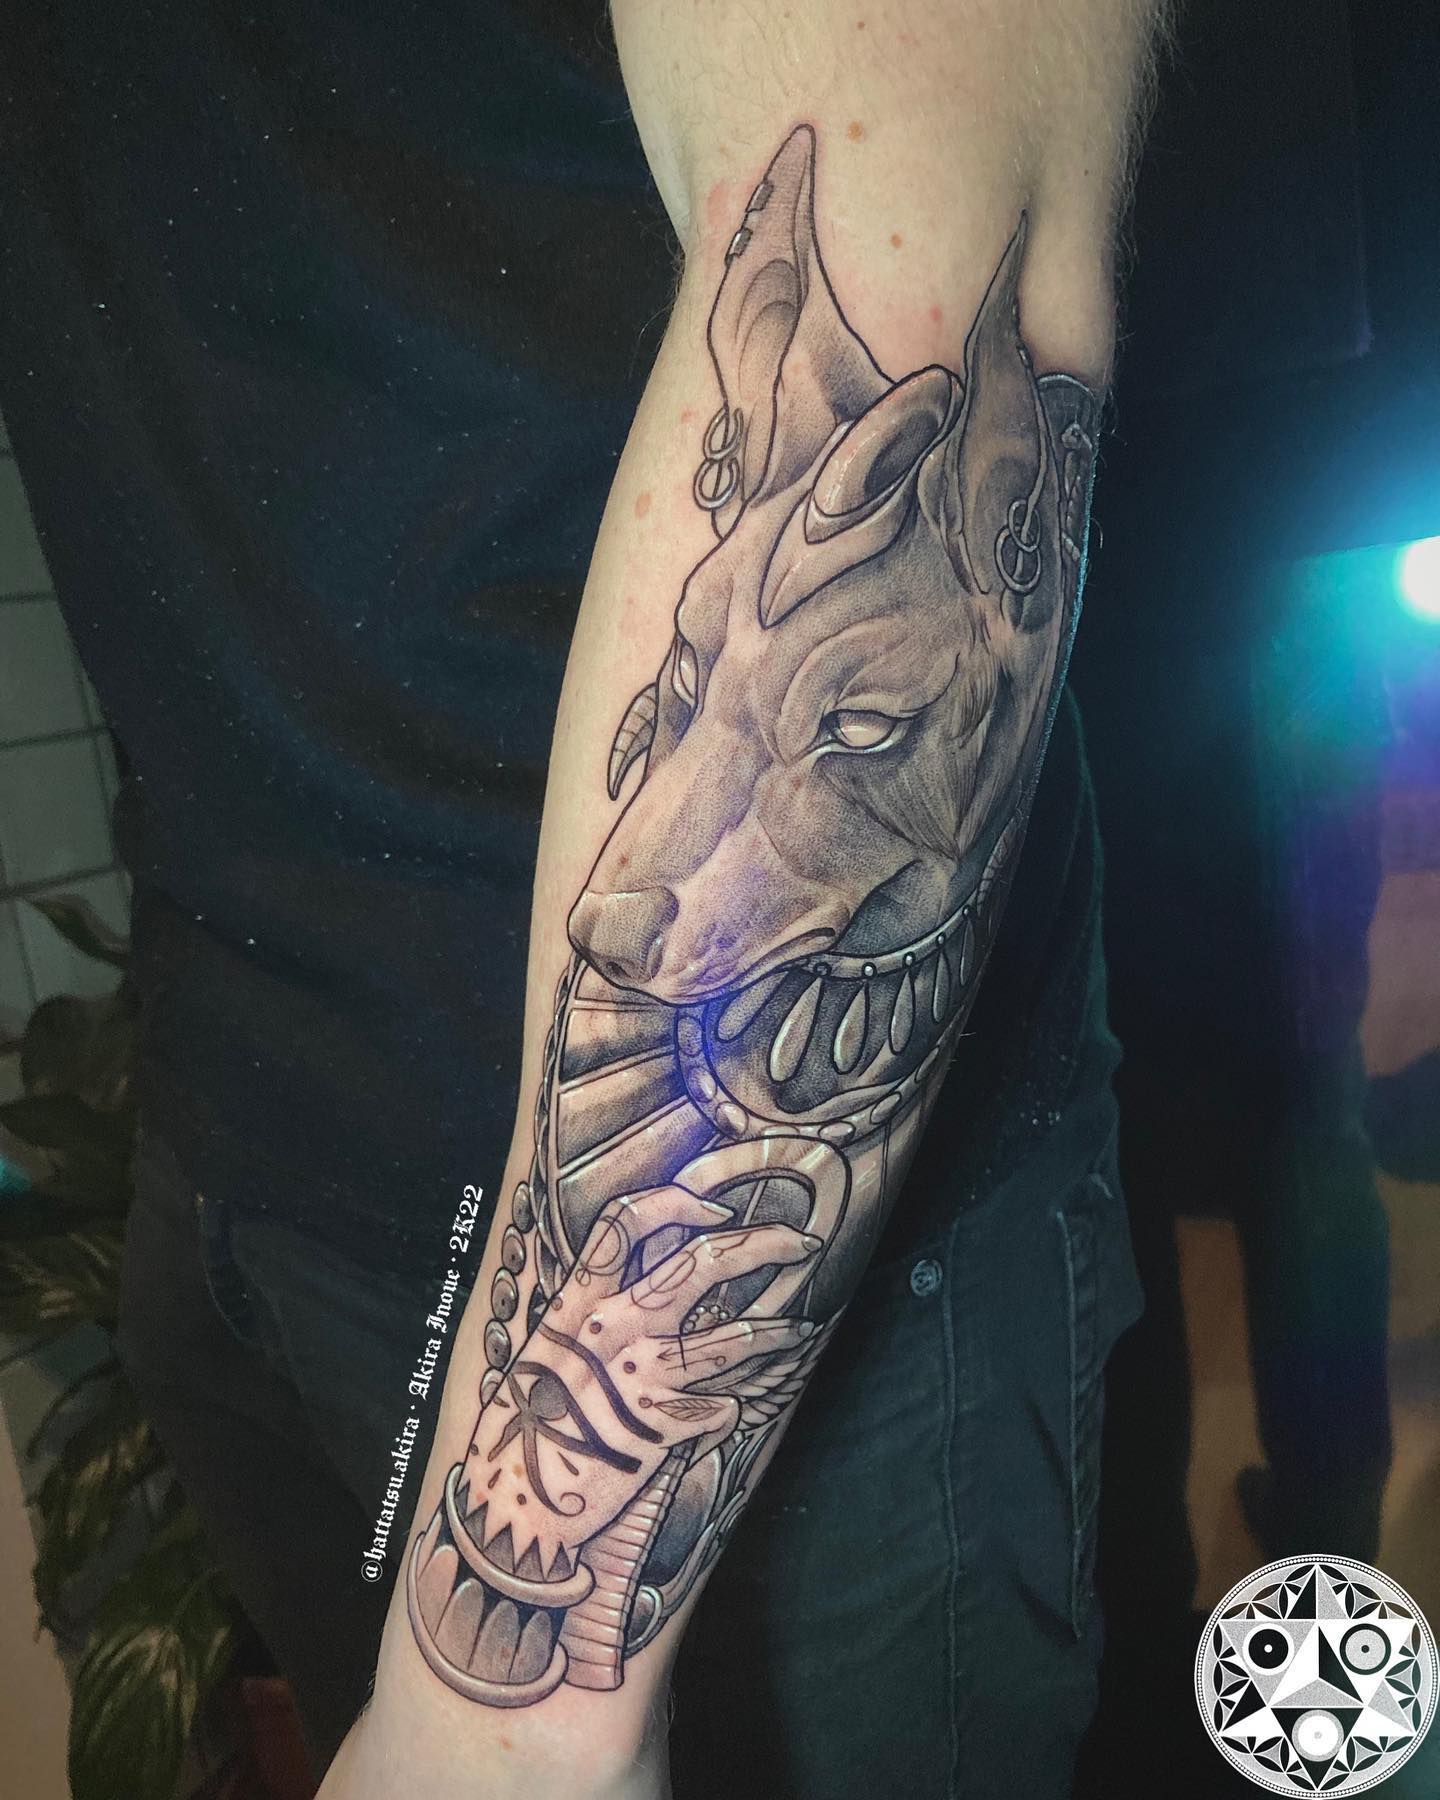 Another splendid Anubis tattoo that is inked on arm.